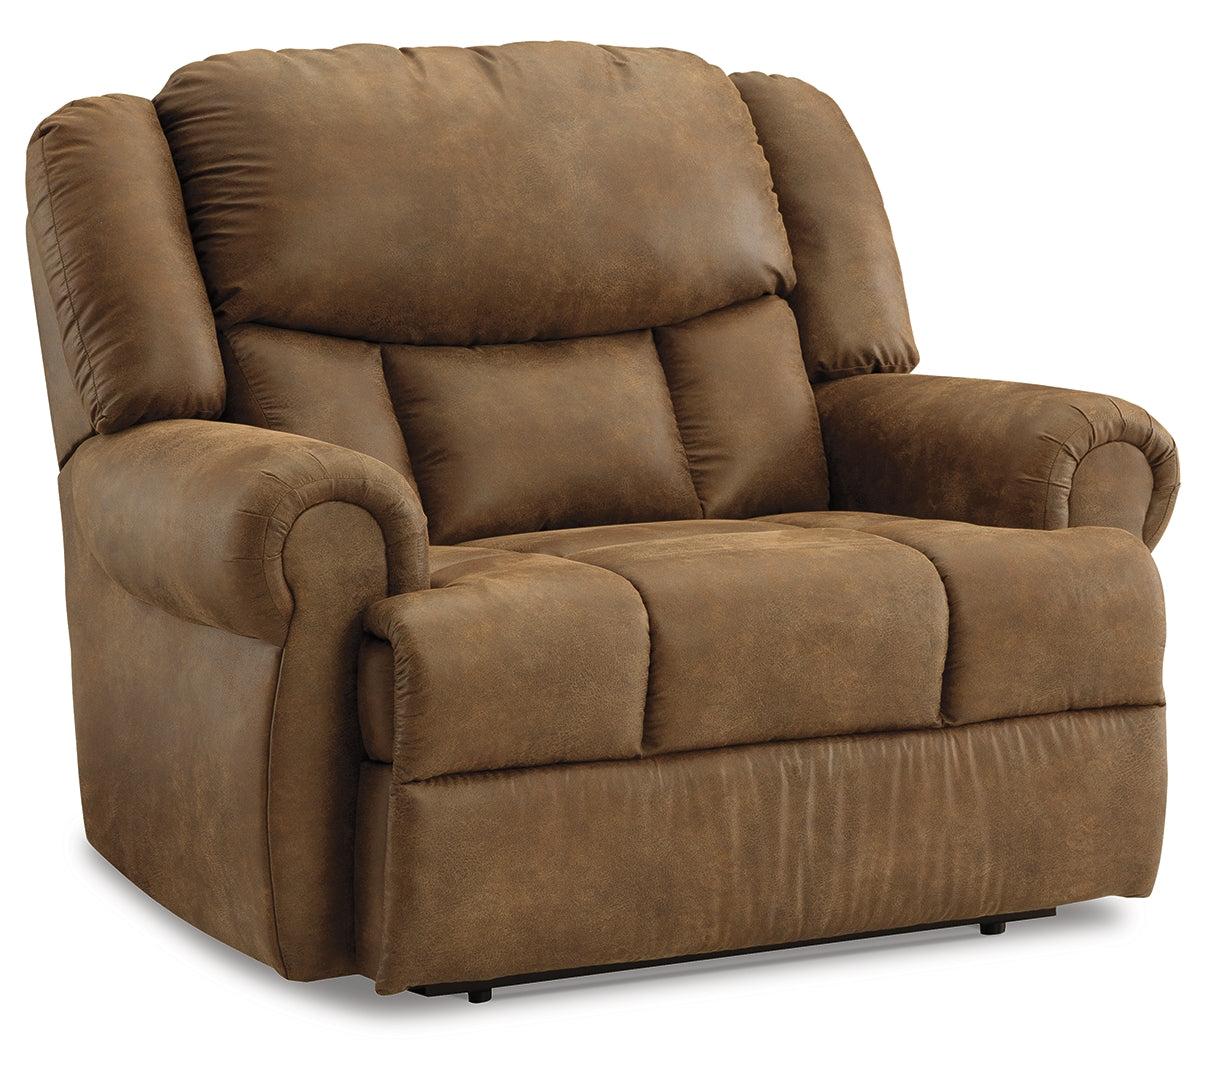 Boothbay Oversized Power Recliner